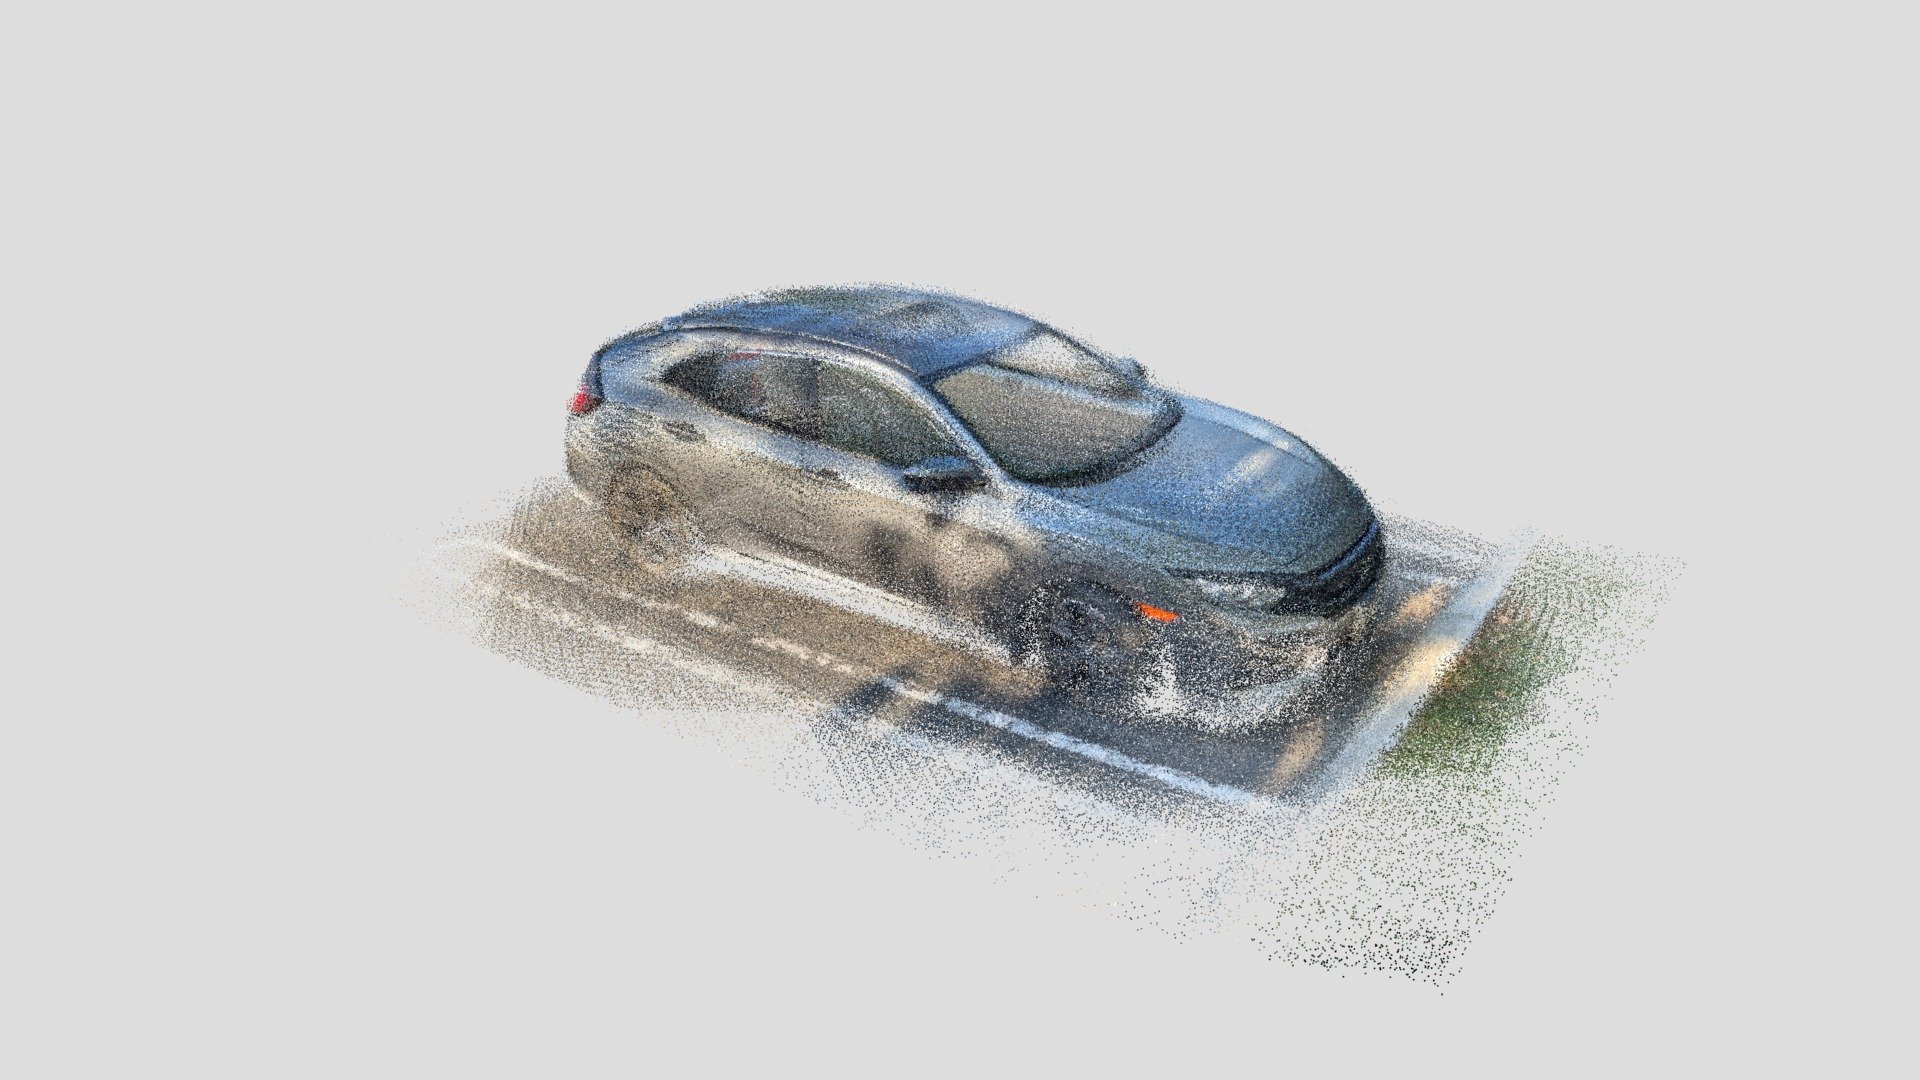 Car scan using SiteScape